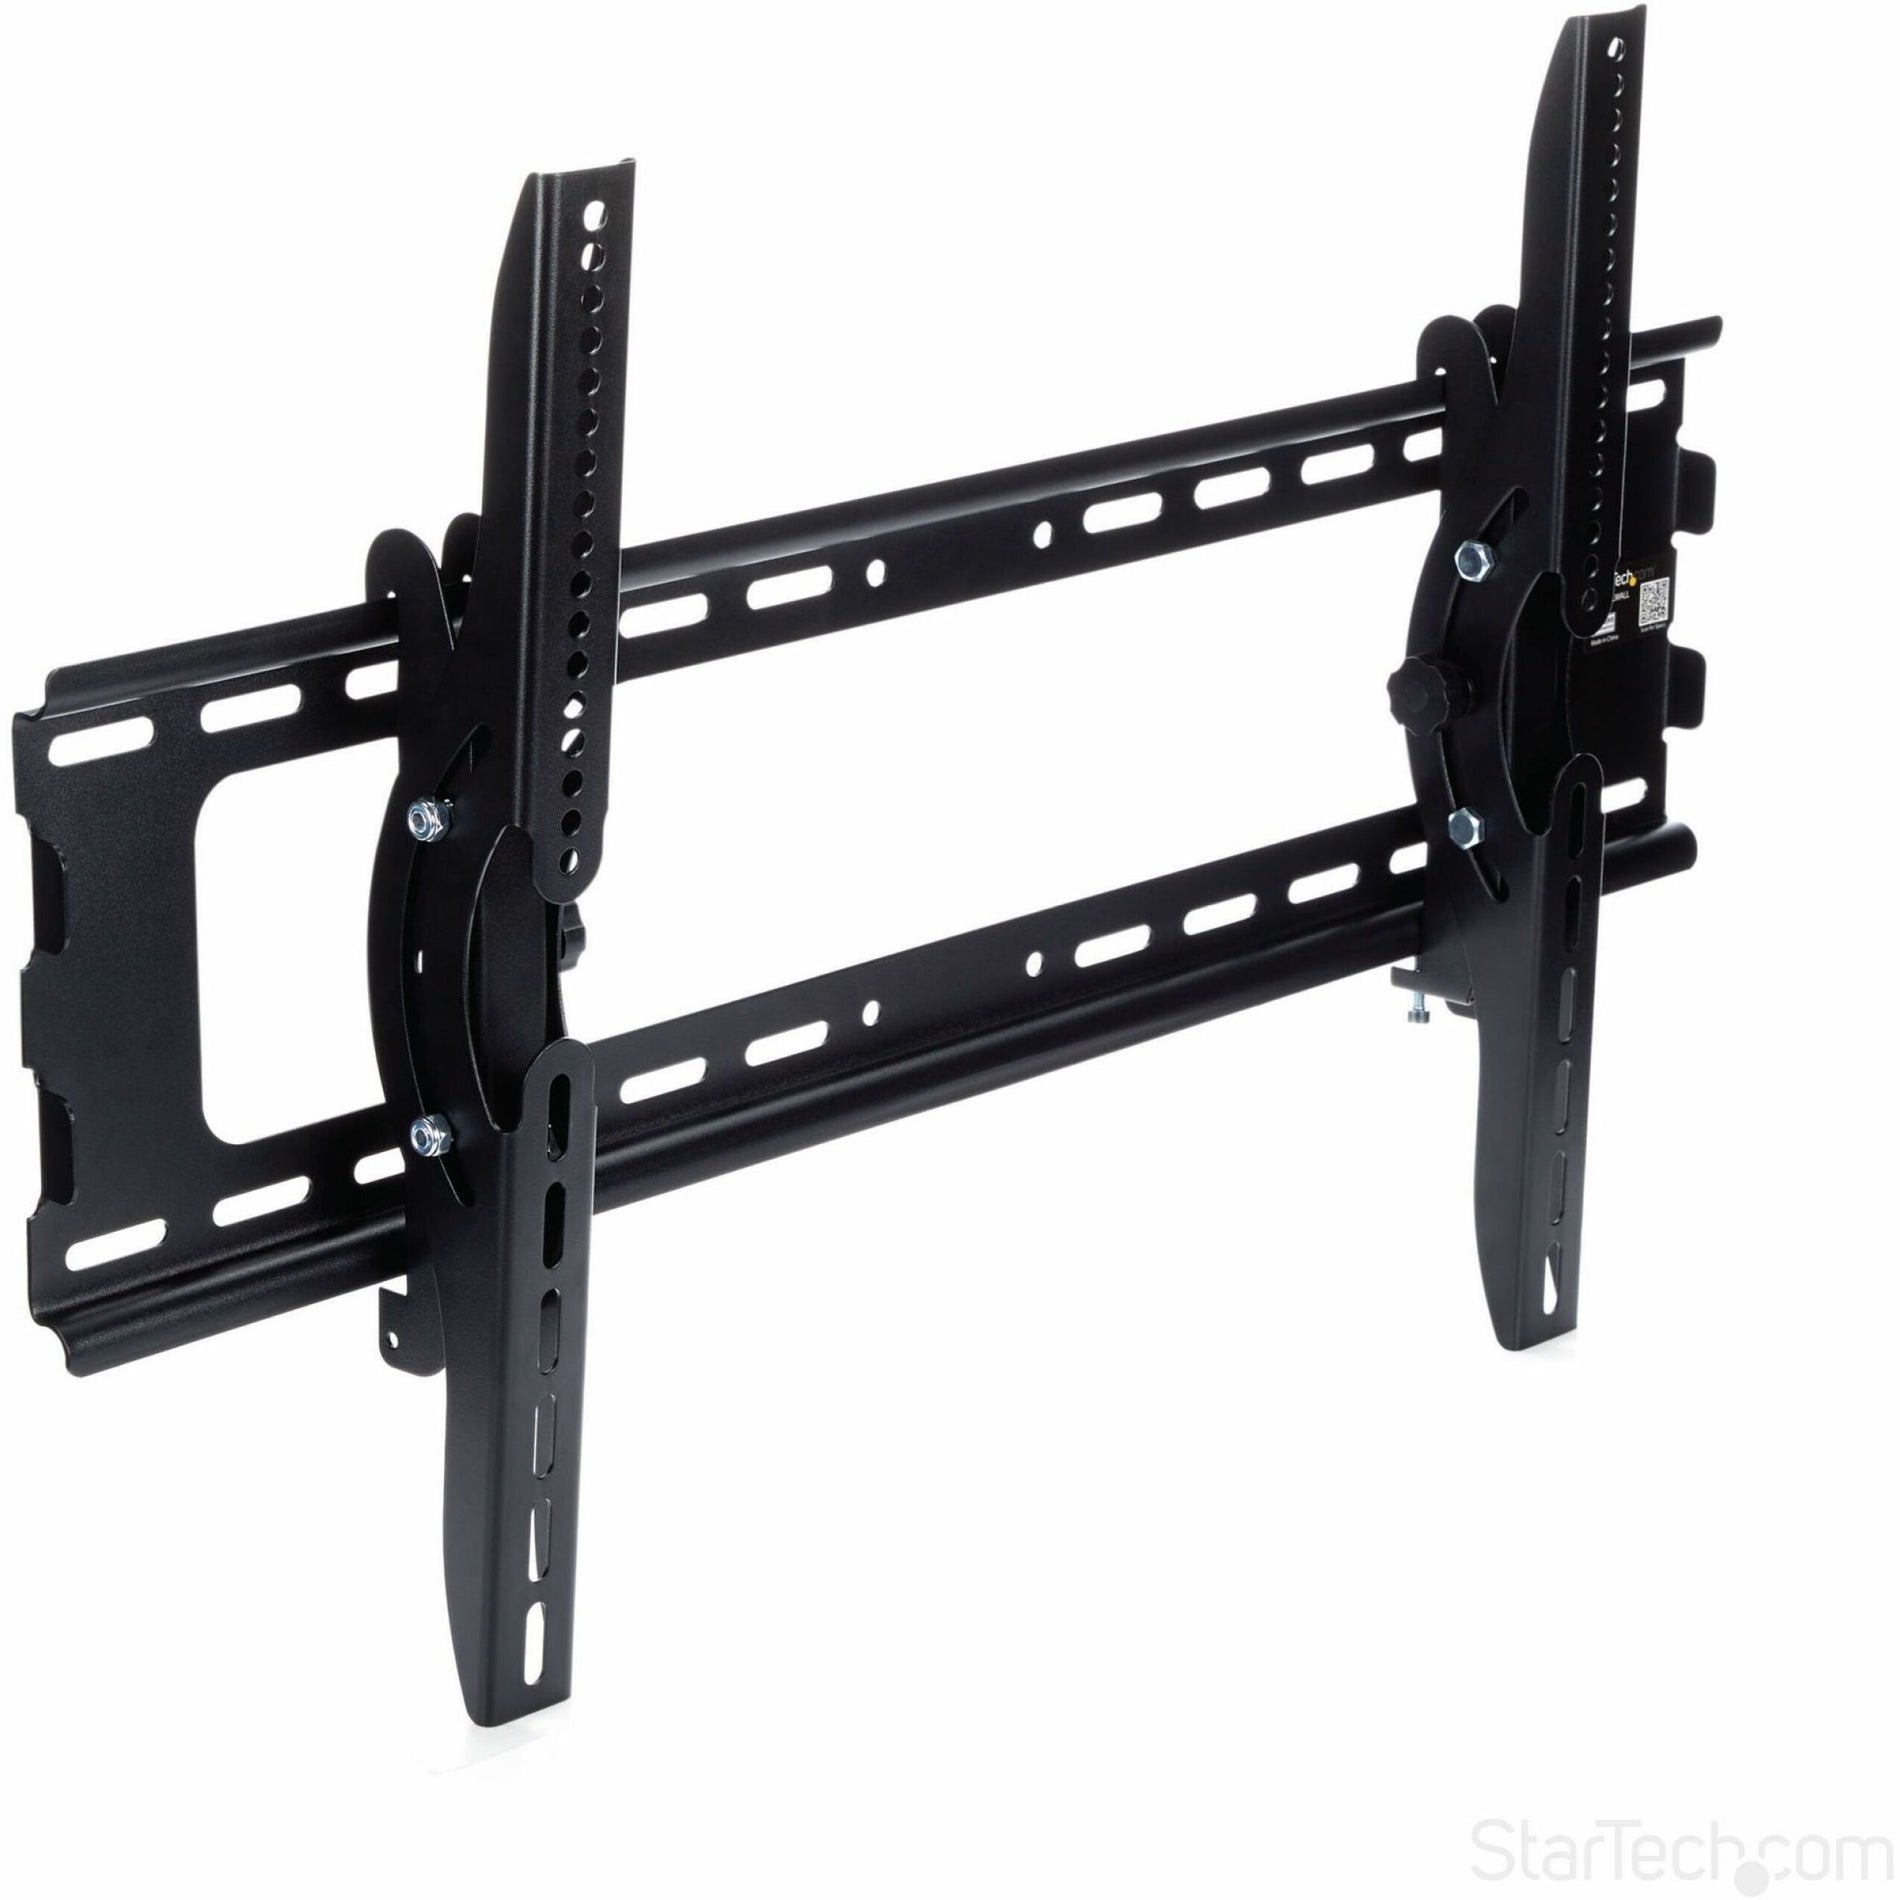 StarTech.com FLATPNLWALL Flat-Screen TV Wall Mount - For 32in to 70in LCD, LED or Plasma TV, Space Saving Design, Adjustable Tilt, Cable Management